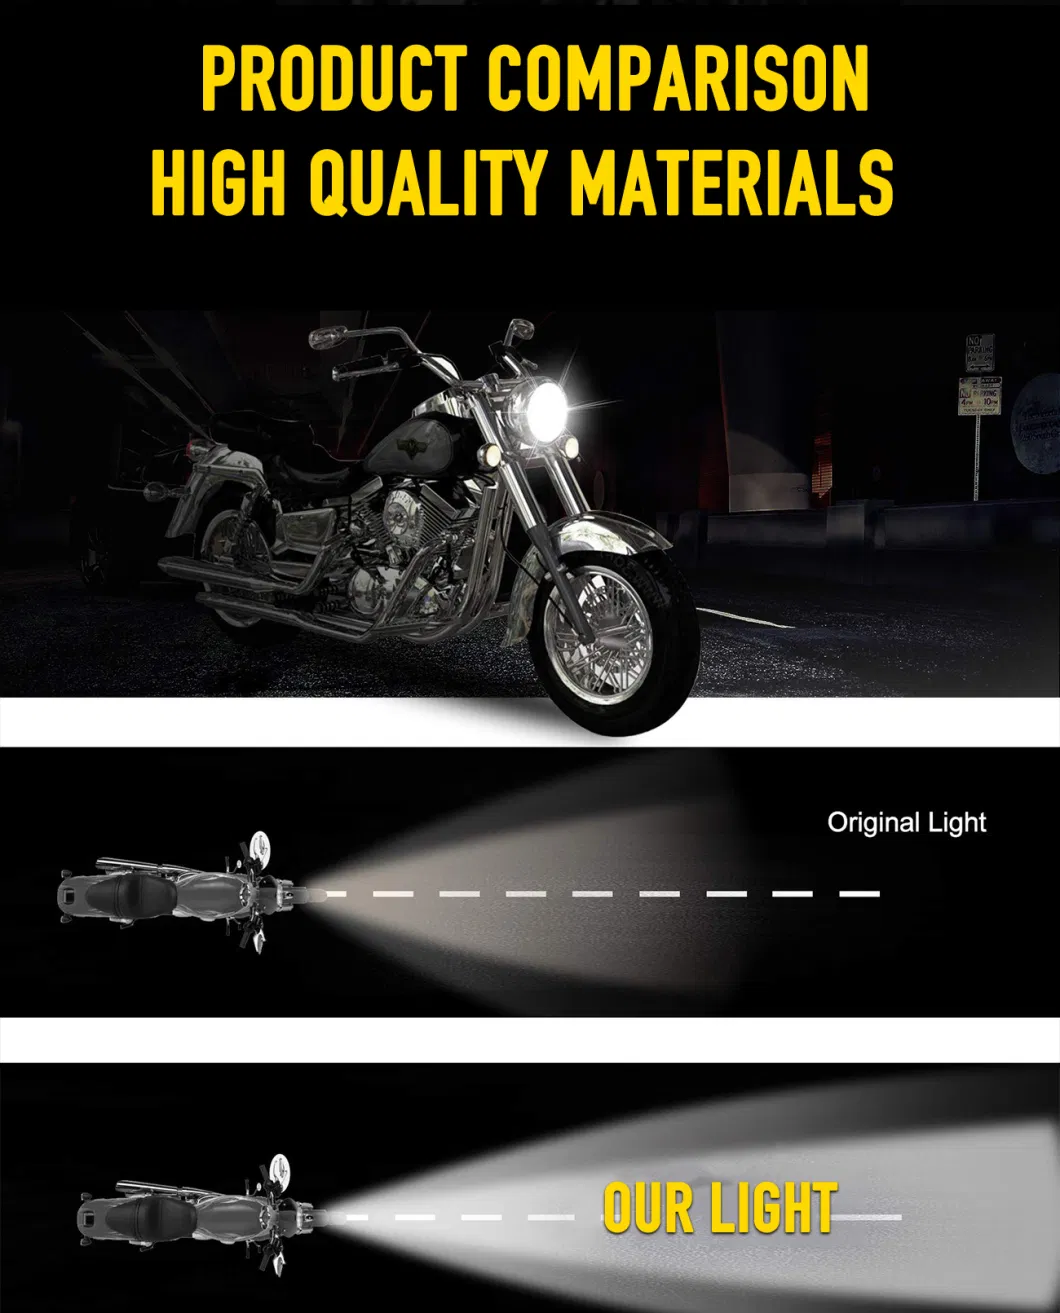 Wholesale 5.75inch Daymaker Round LED Headlight LED Motorcycle Headlight LED Headlight H4